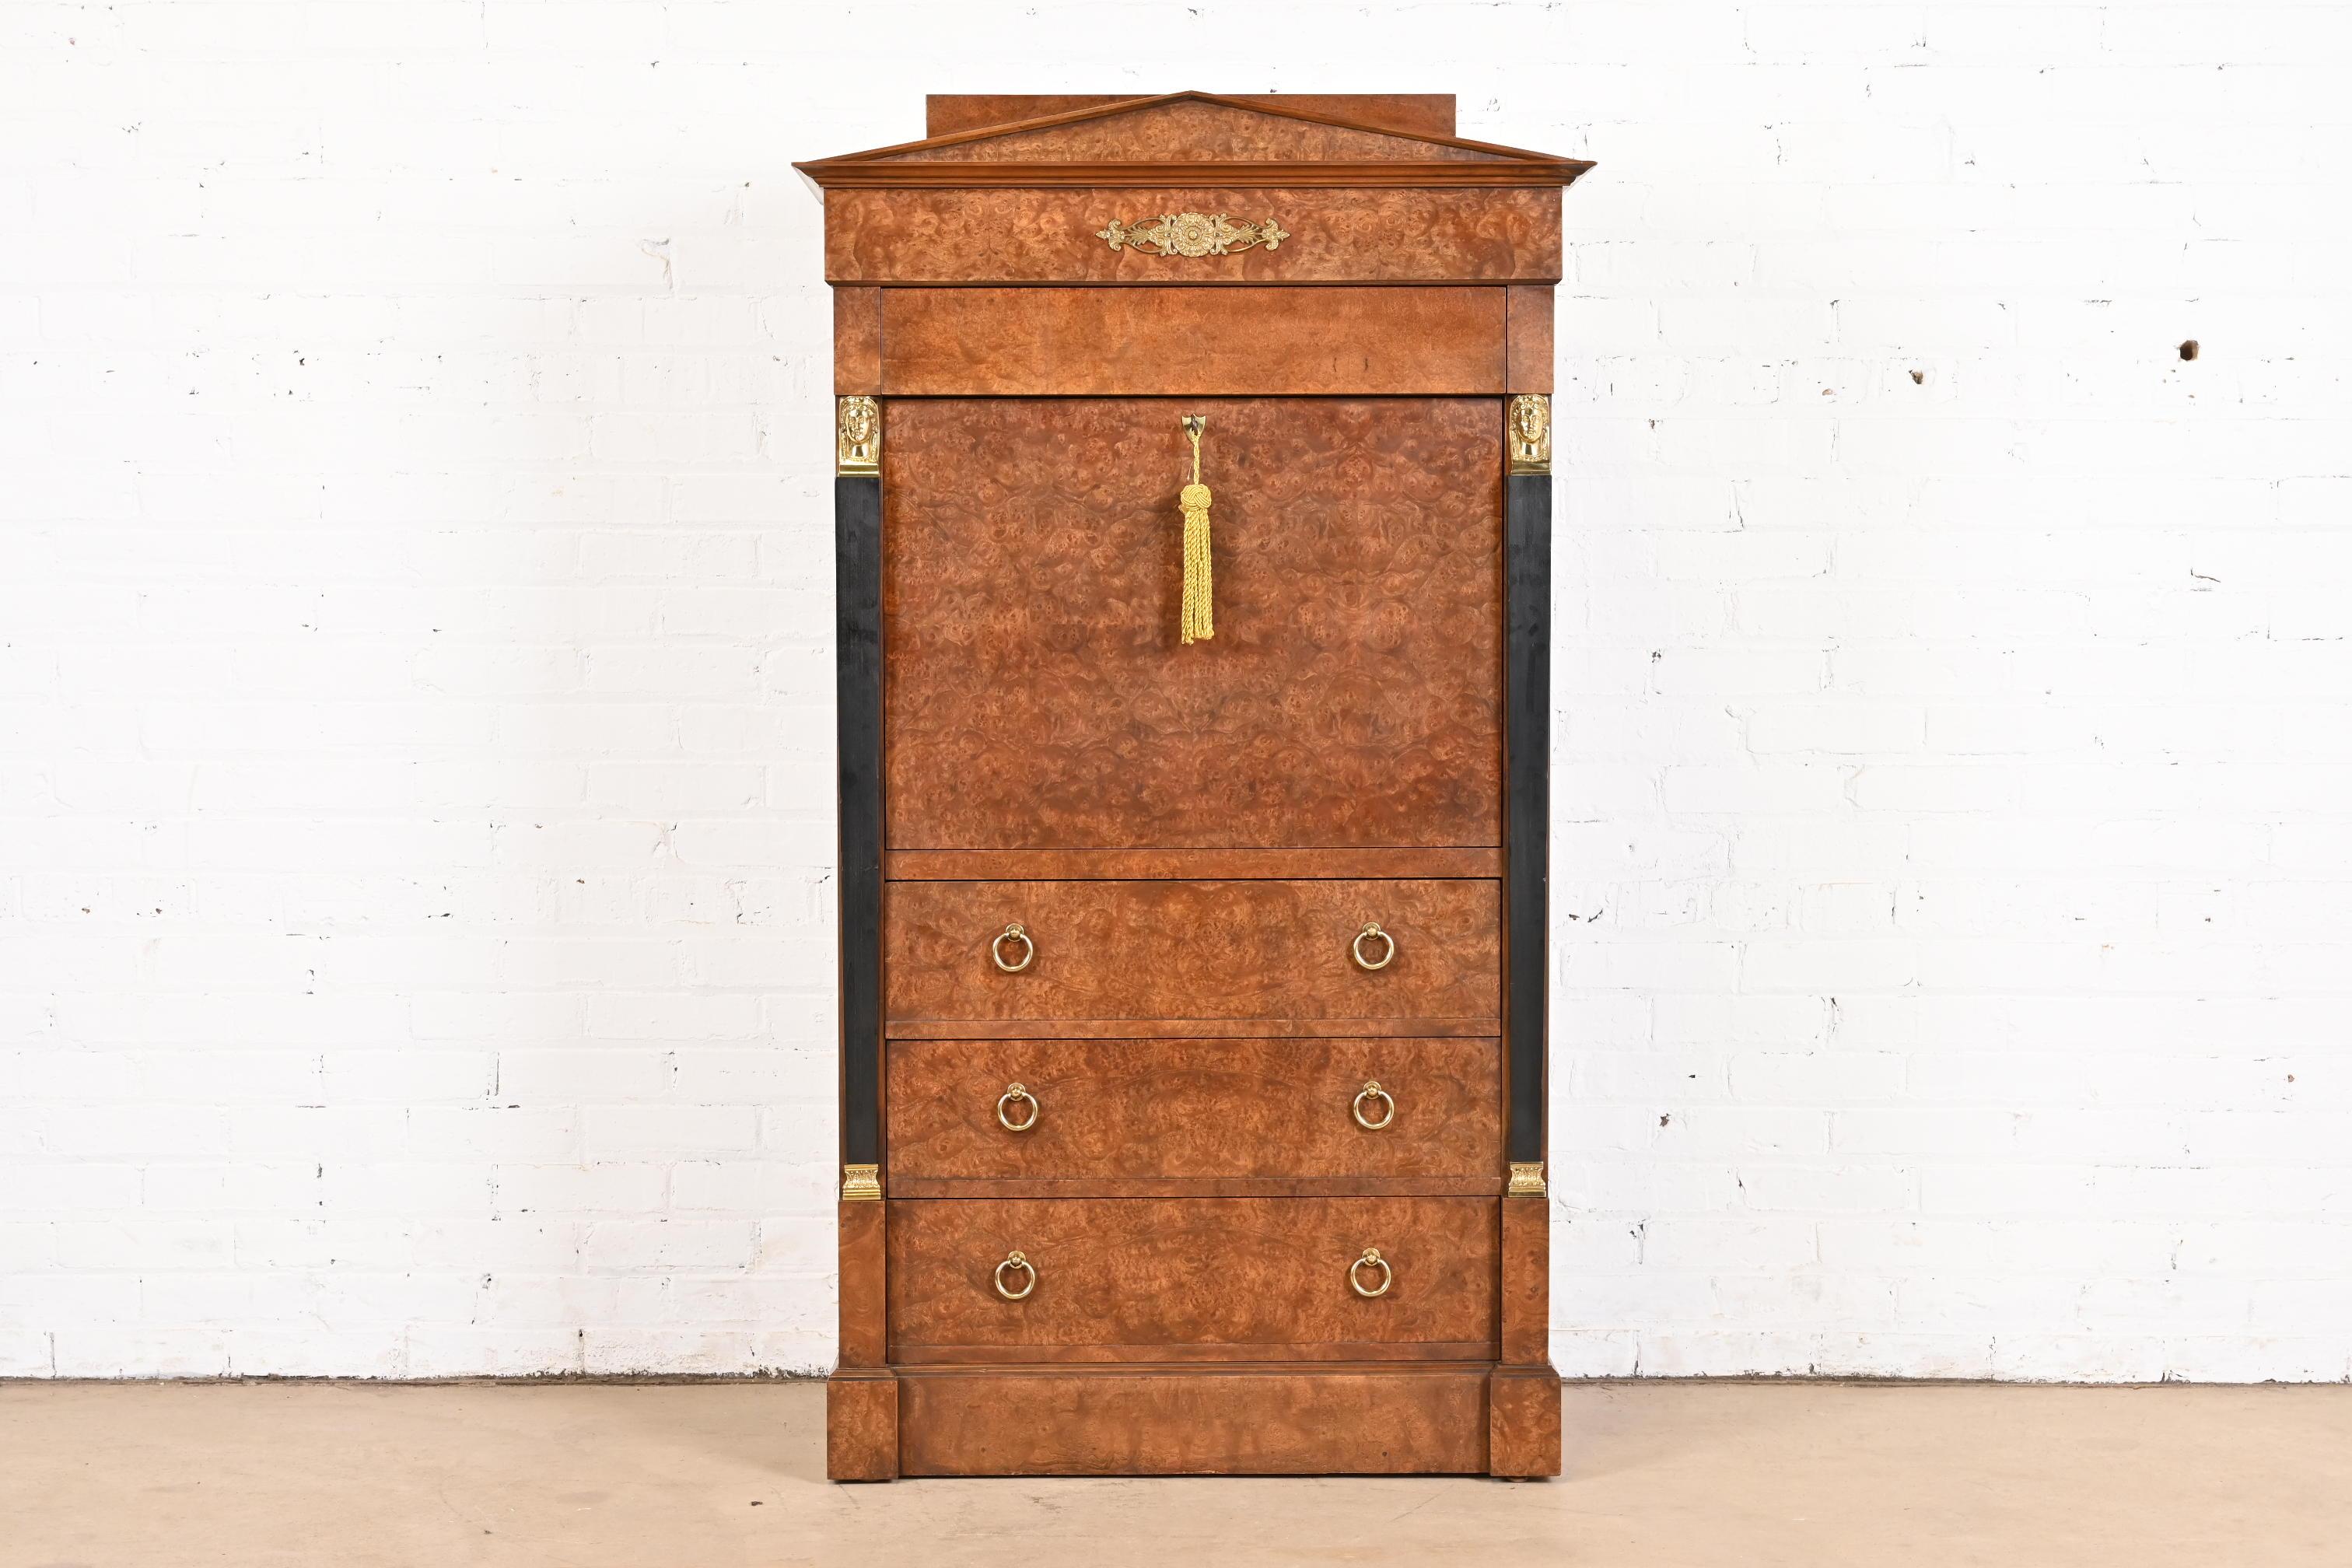 An outstanding French Empire or Neoclassical style drop front secretary desk

By Baker Furniture

USA, Circa 1980s

Gorgeous burl wood, with ebonized columns, and original brass hardware and mounted ormolu. Desk locks, and original key is